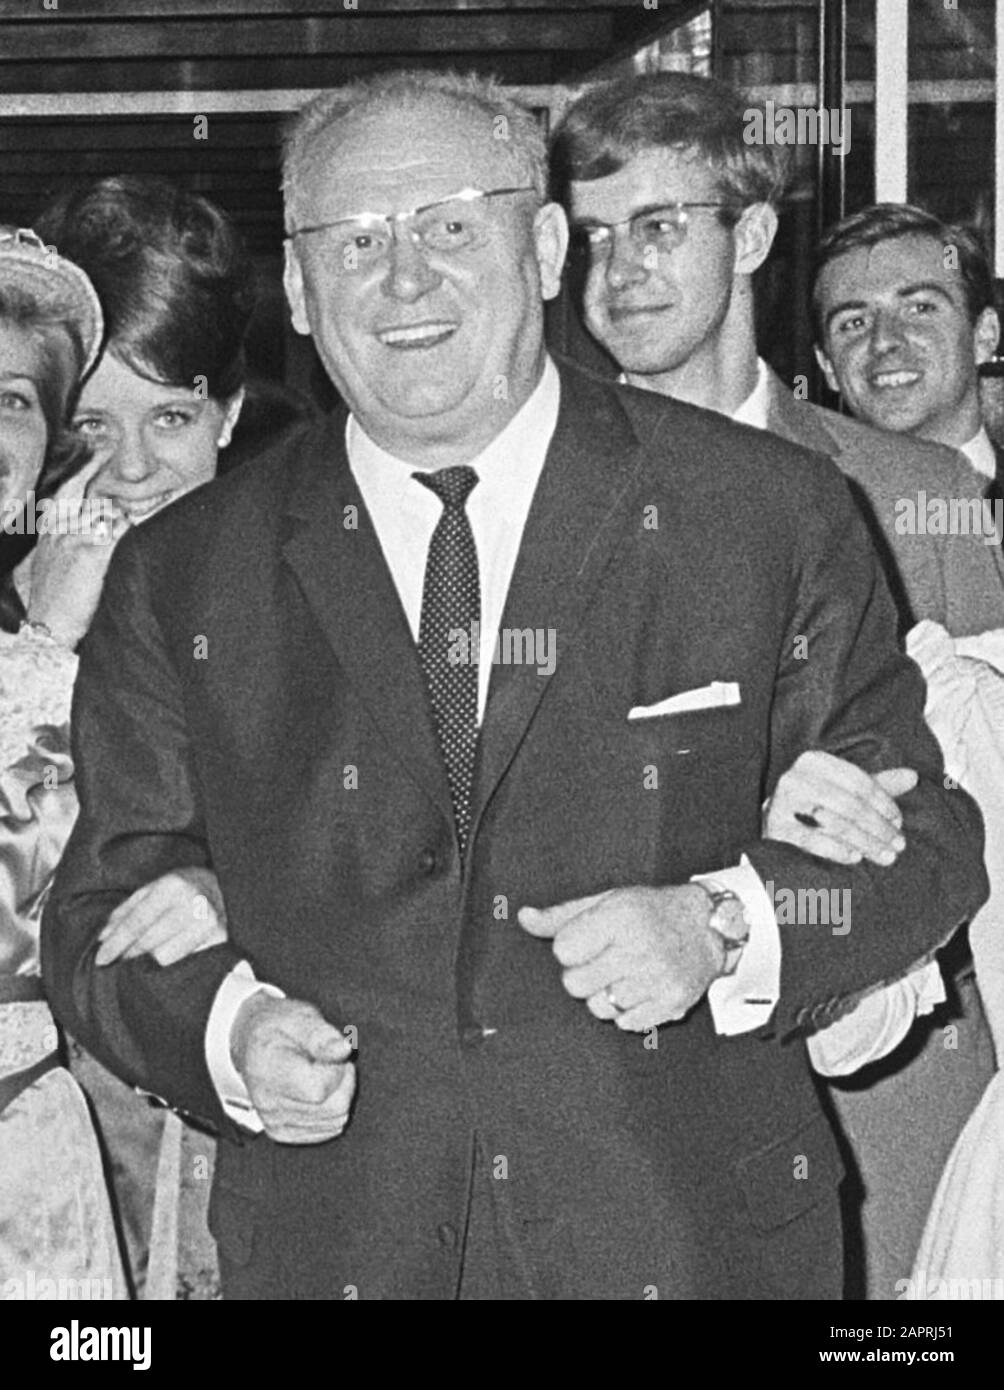 French: German actor Gert Fröbe has a premiere of the film These wonderful flying fools in their funny machines, July 15, 1965. Stock Photo